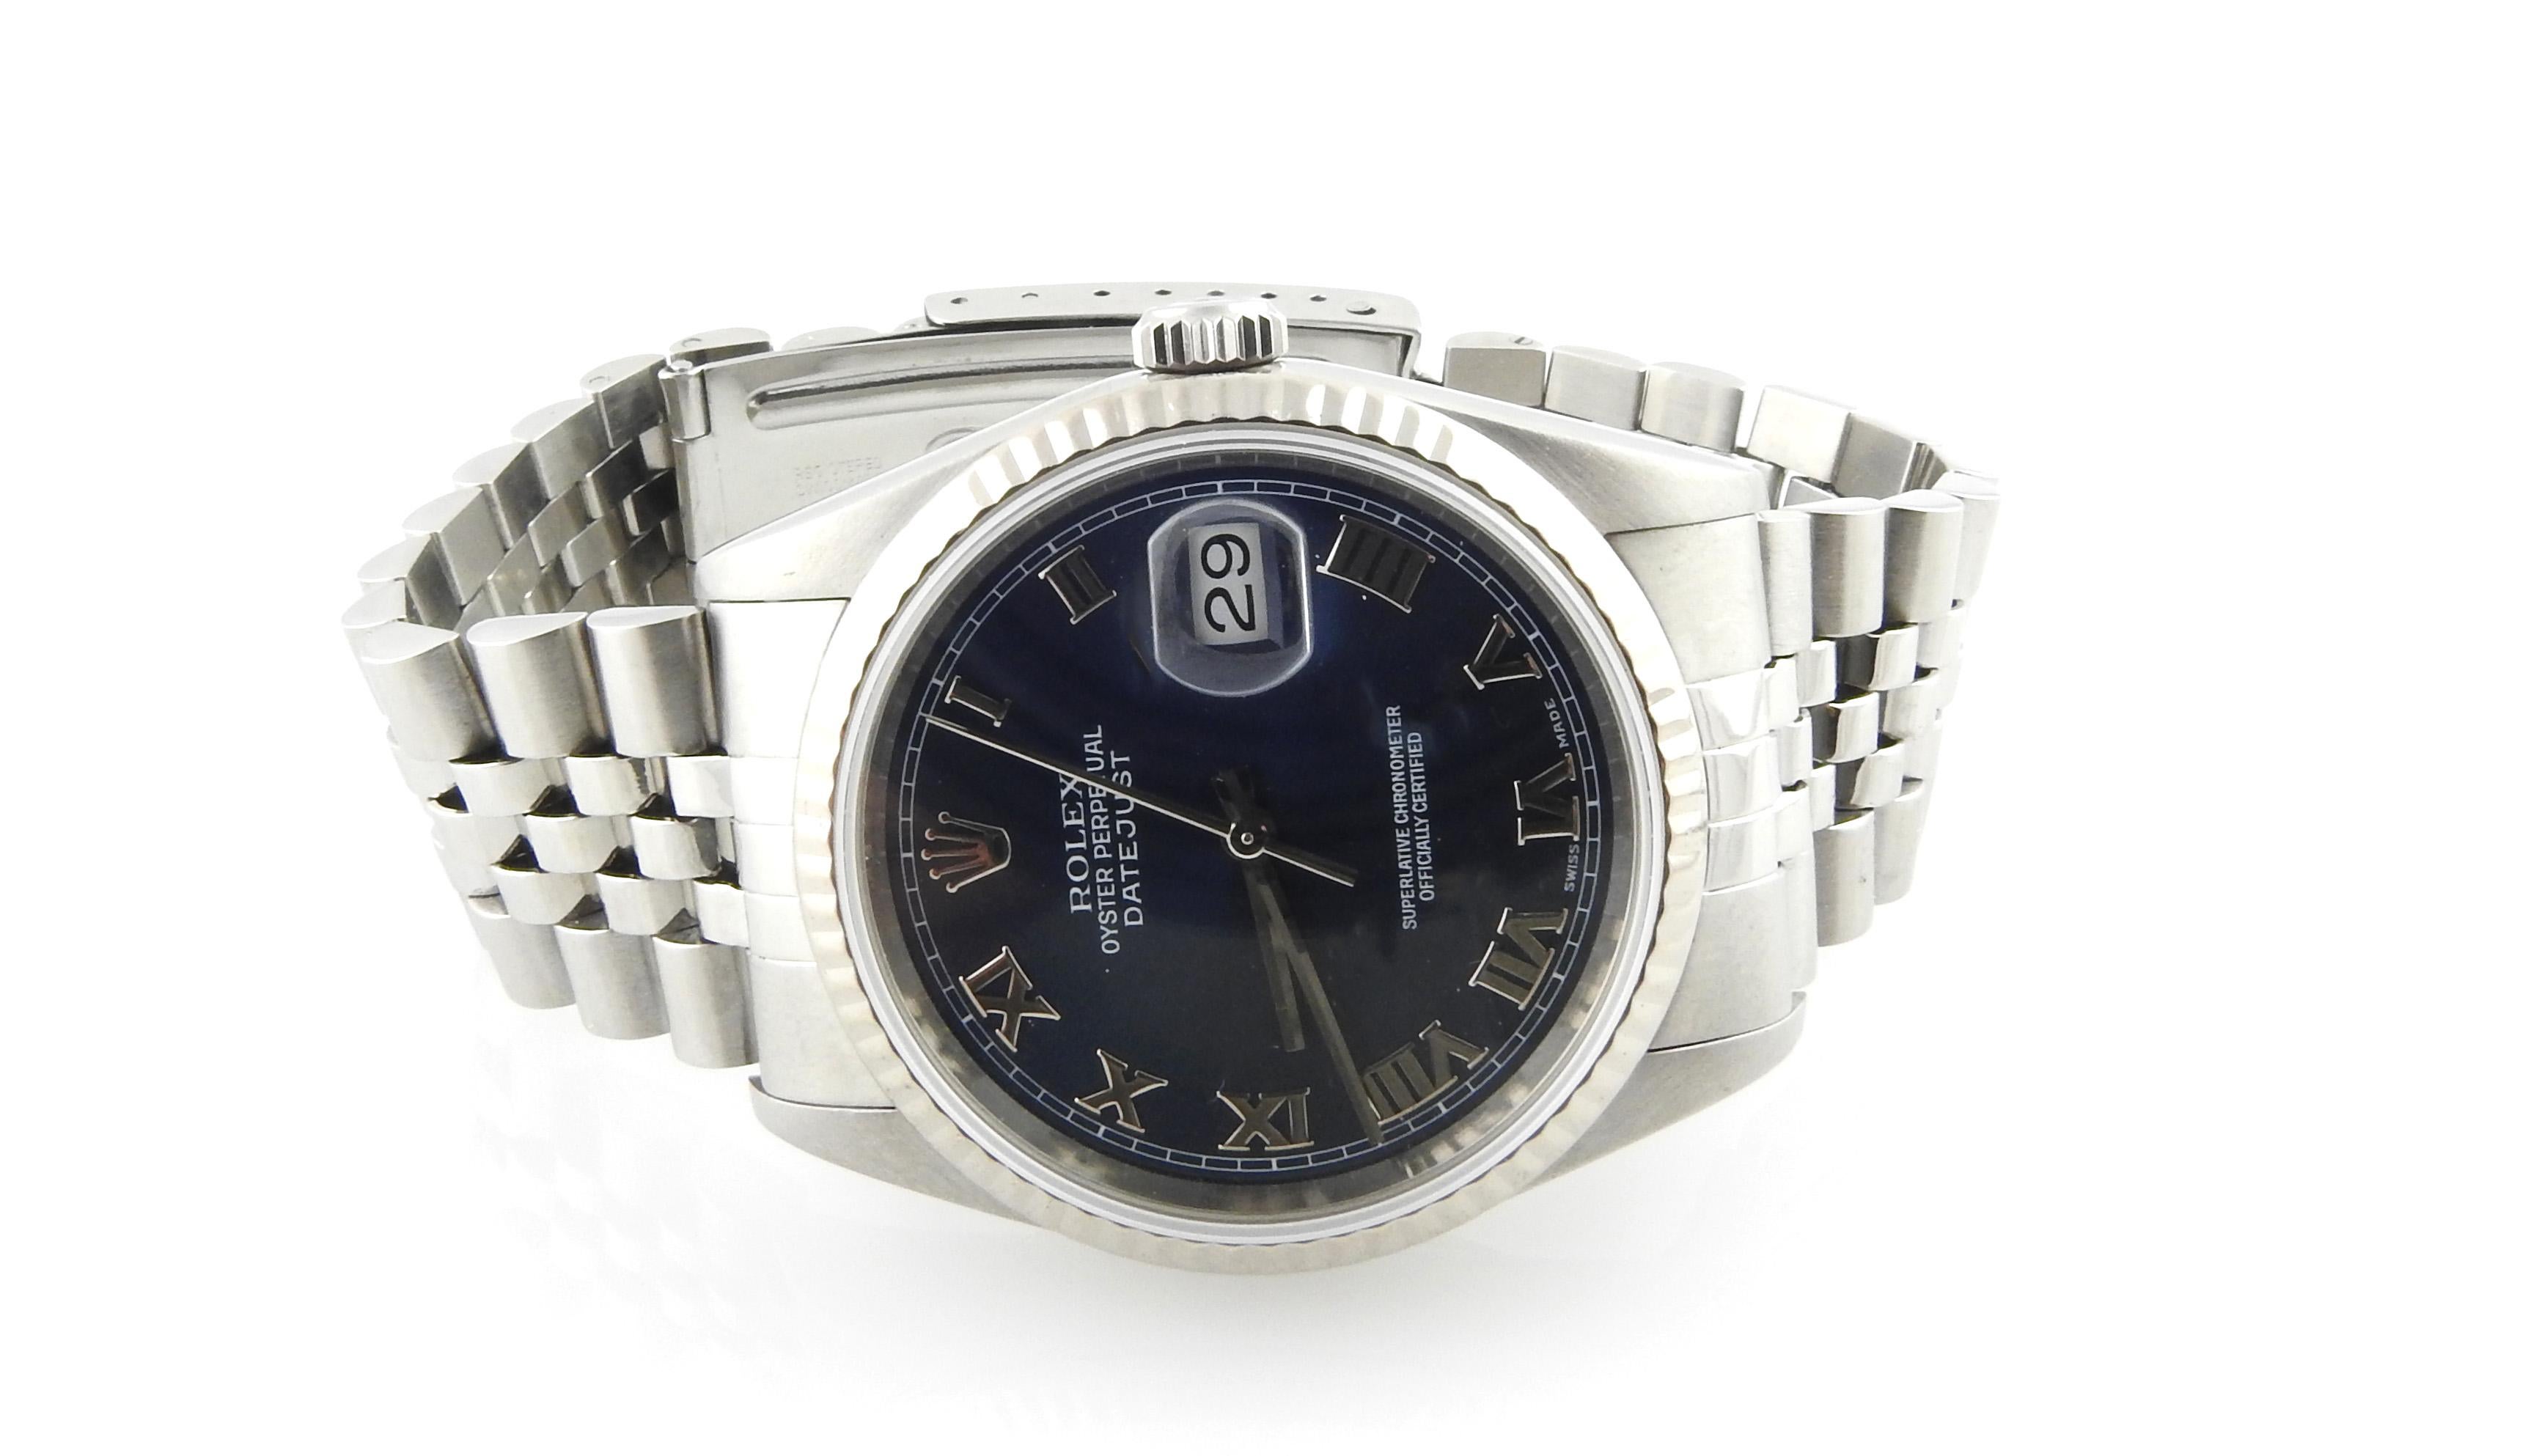 Rolex Men's Datejust Watch



Model: 16234

Serial: K762565



2001 Rolex midsize watch 



36mm case size



Stainless steel case with 18K white gold bezel



Blue dial with silver Roman markers



Jubilee band - fits up to 7 1/2